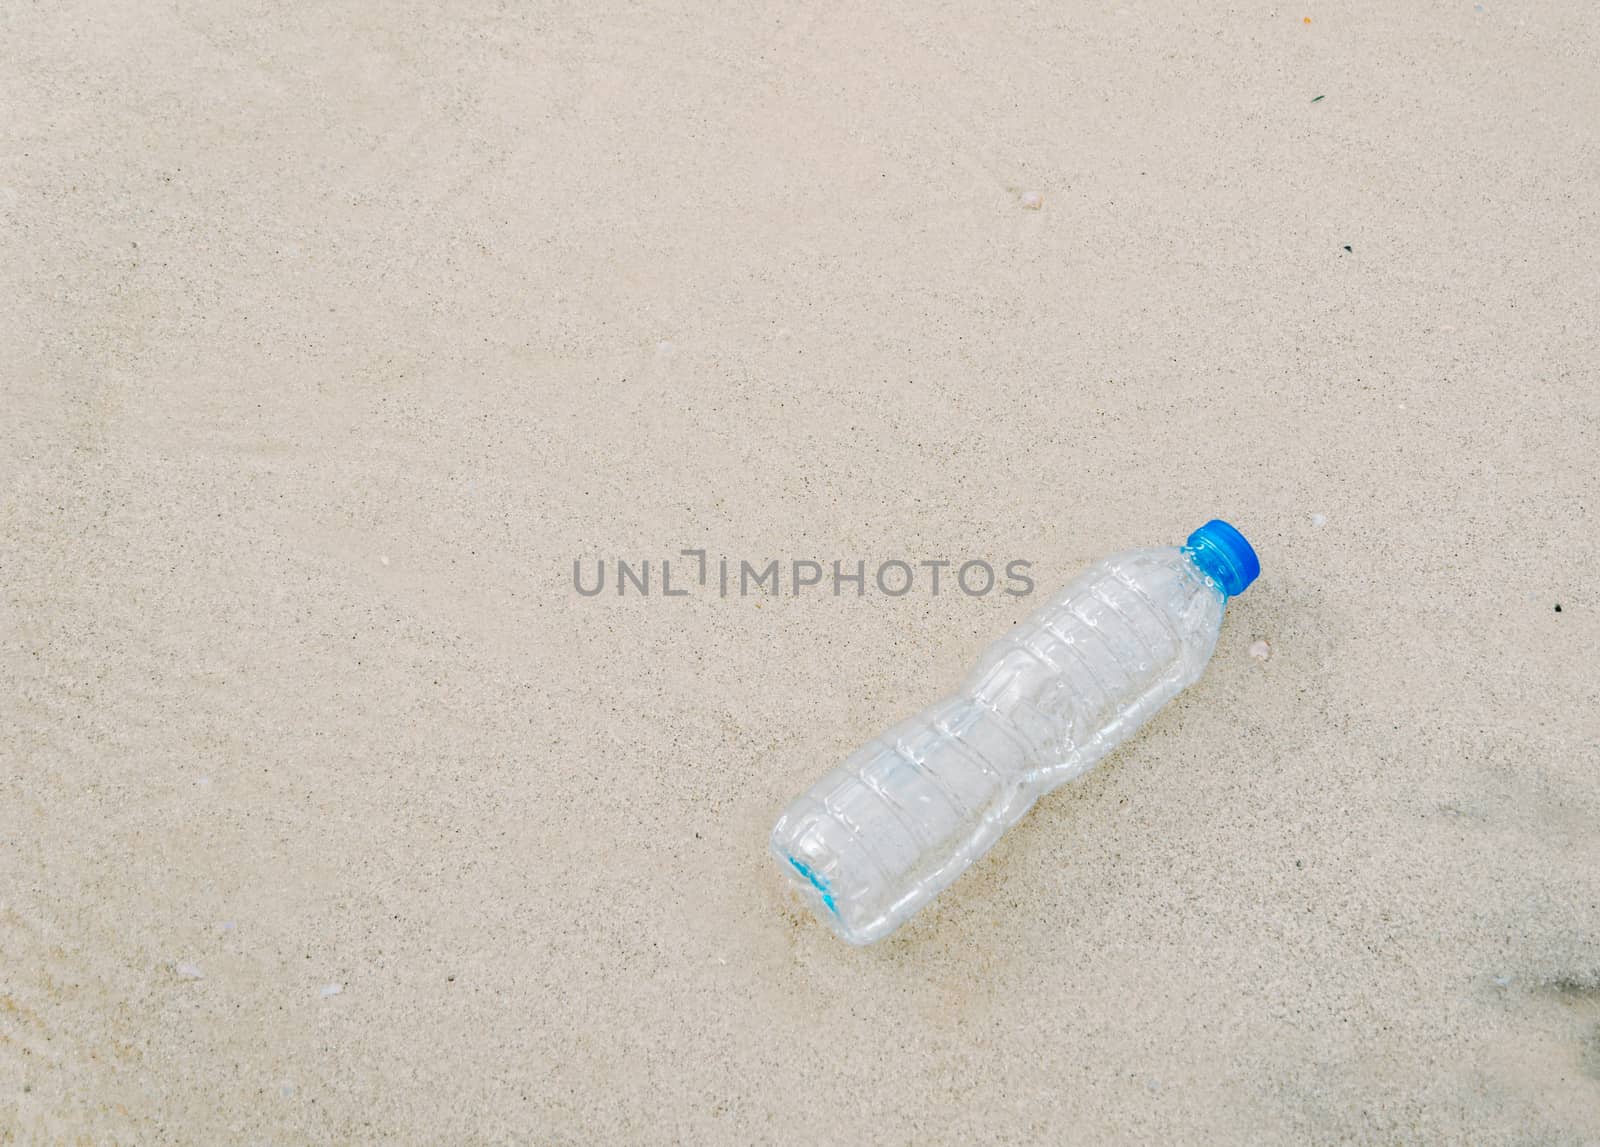 Plastic bottle garbage on the beach Human waste dumping by sompongtom